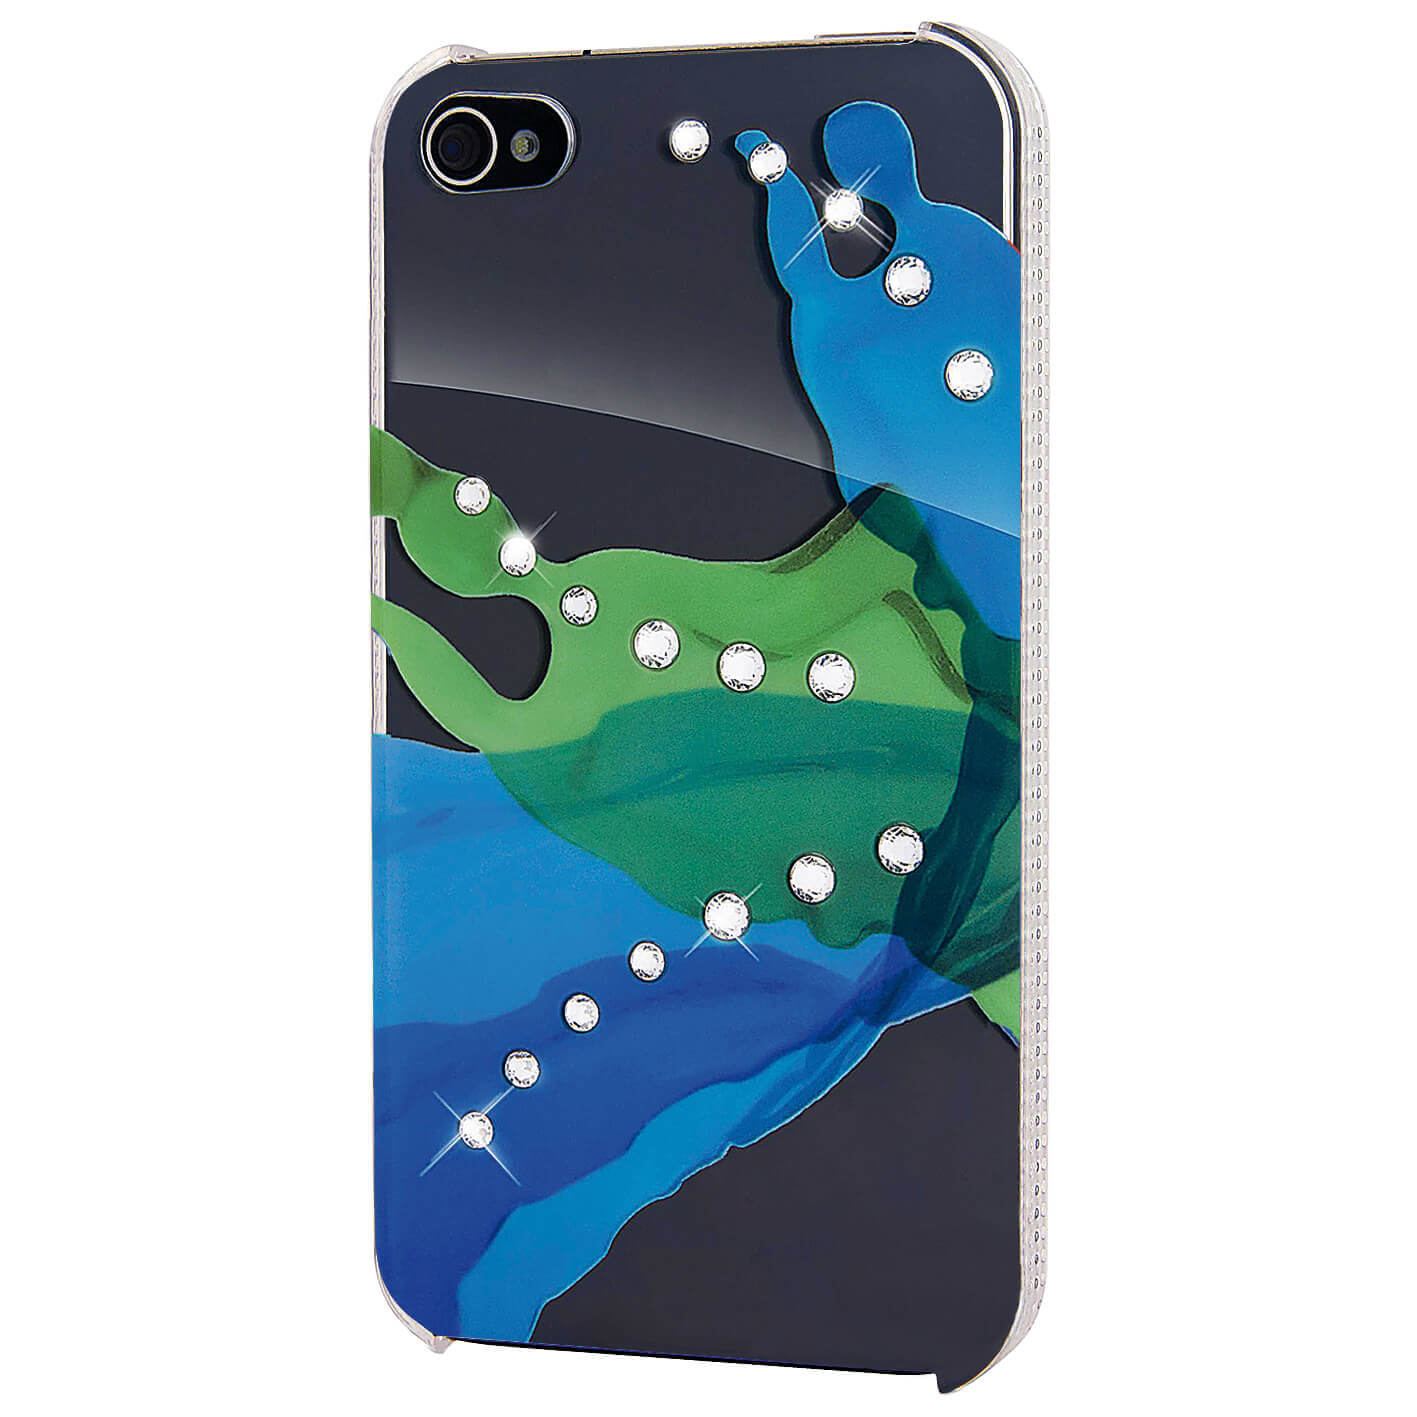 Liquids Mobile Phone Cover fo r Apple iPhone 4/4S, green